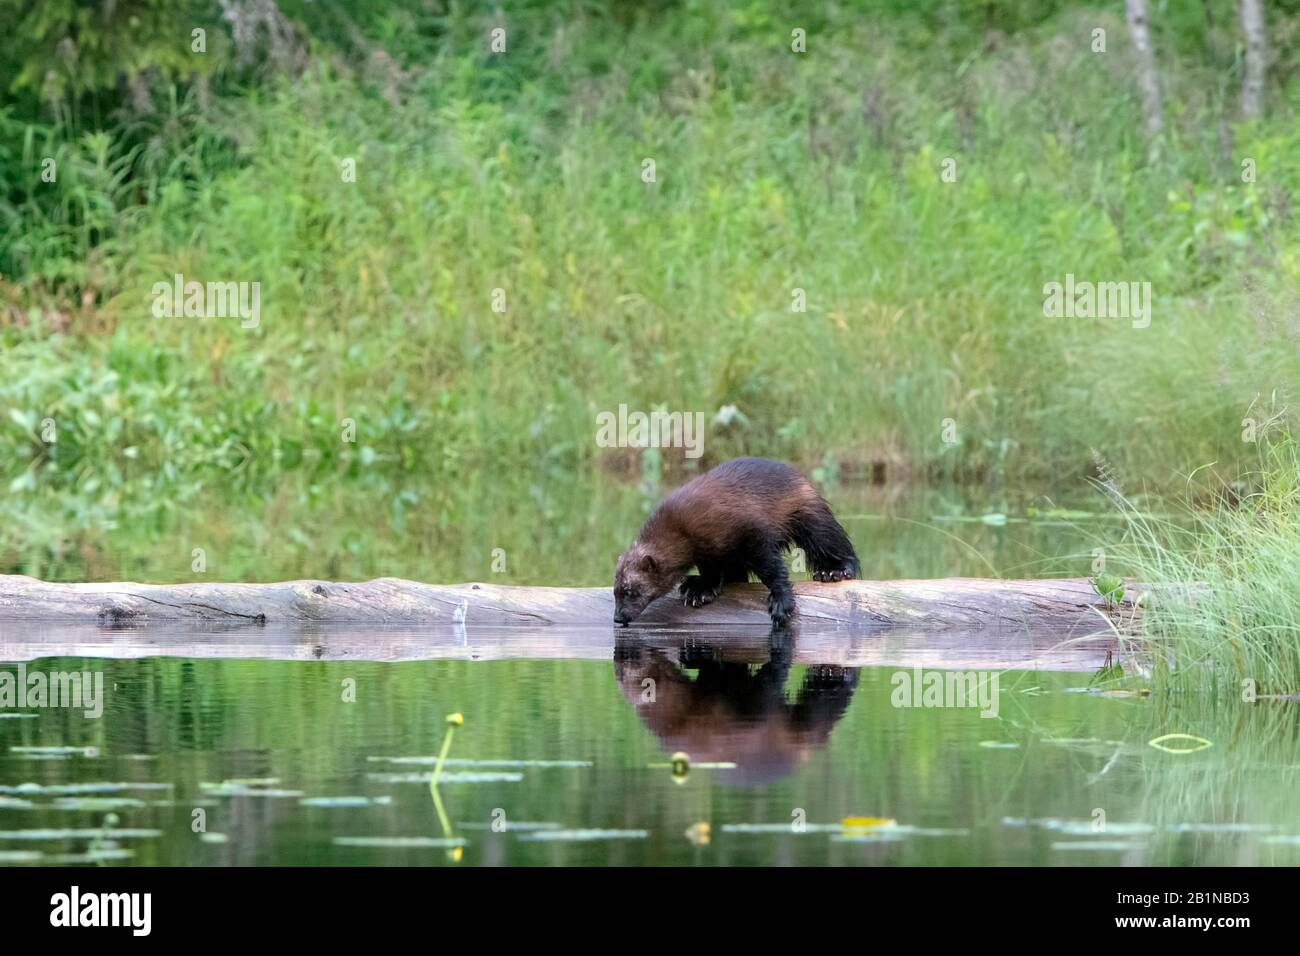 wolverine (Gulo gulo), standing on a dead tree trunk in the water, Finland Stock Photo